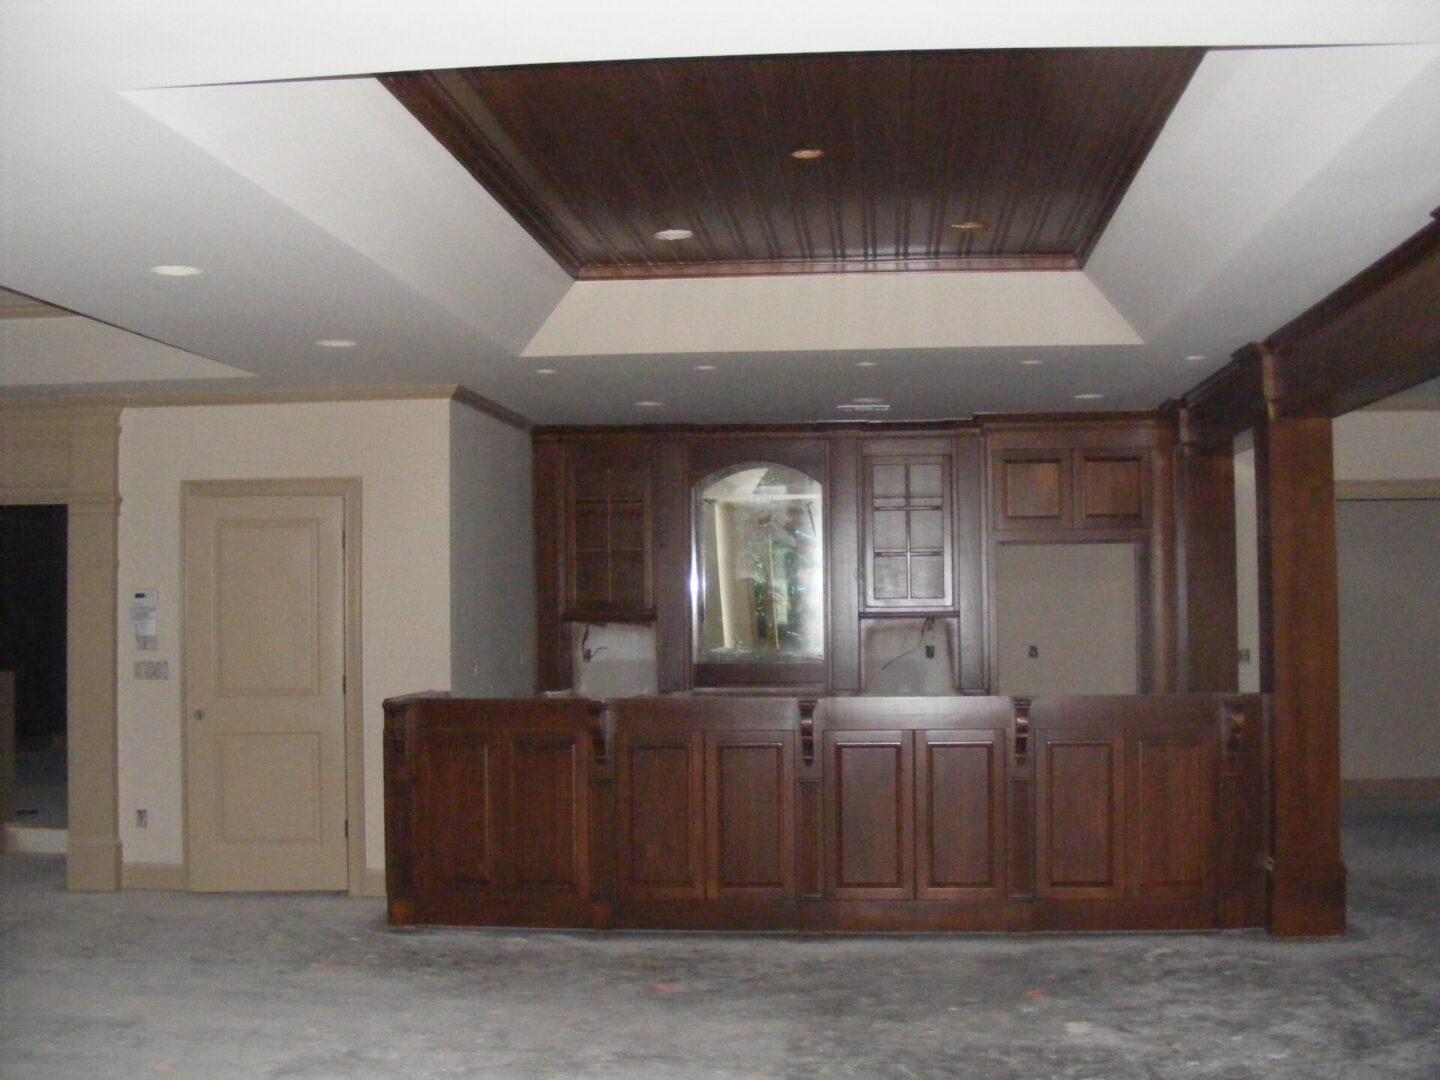 A room with wood cabinets and a ceiling.